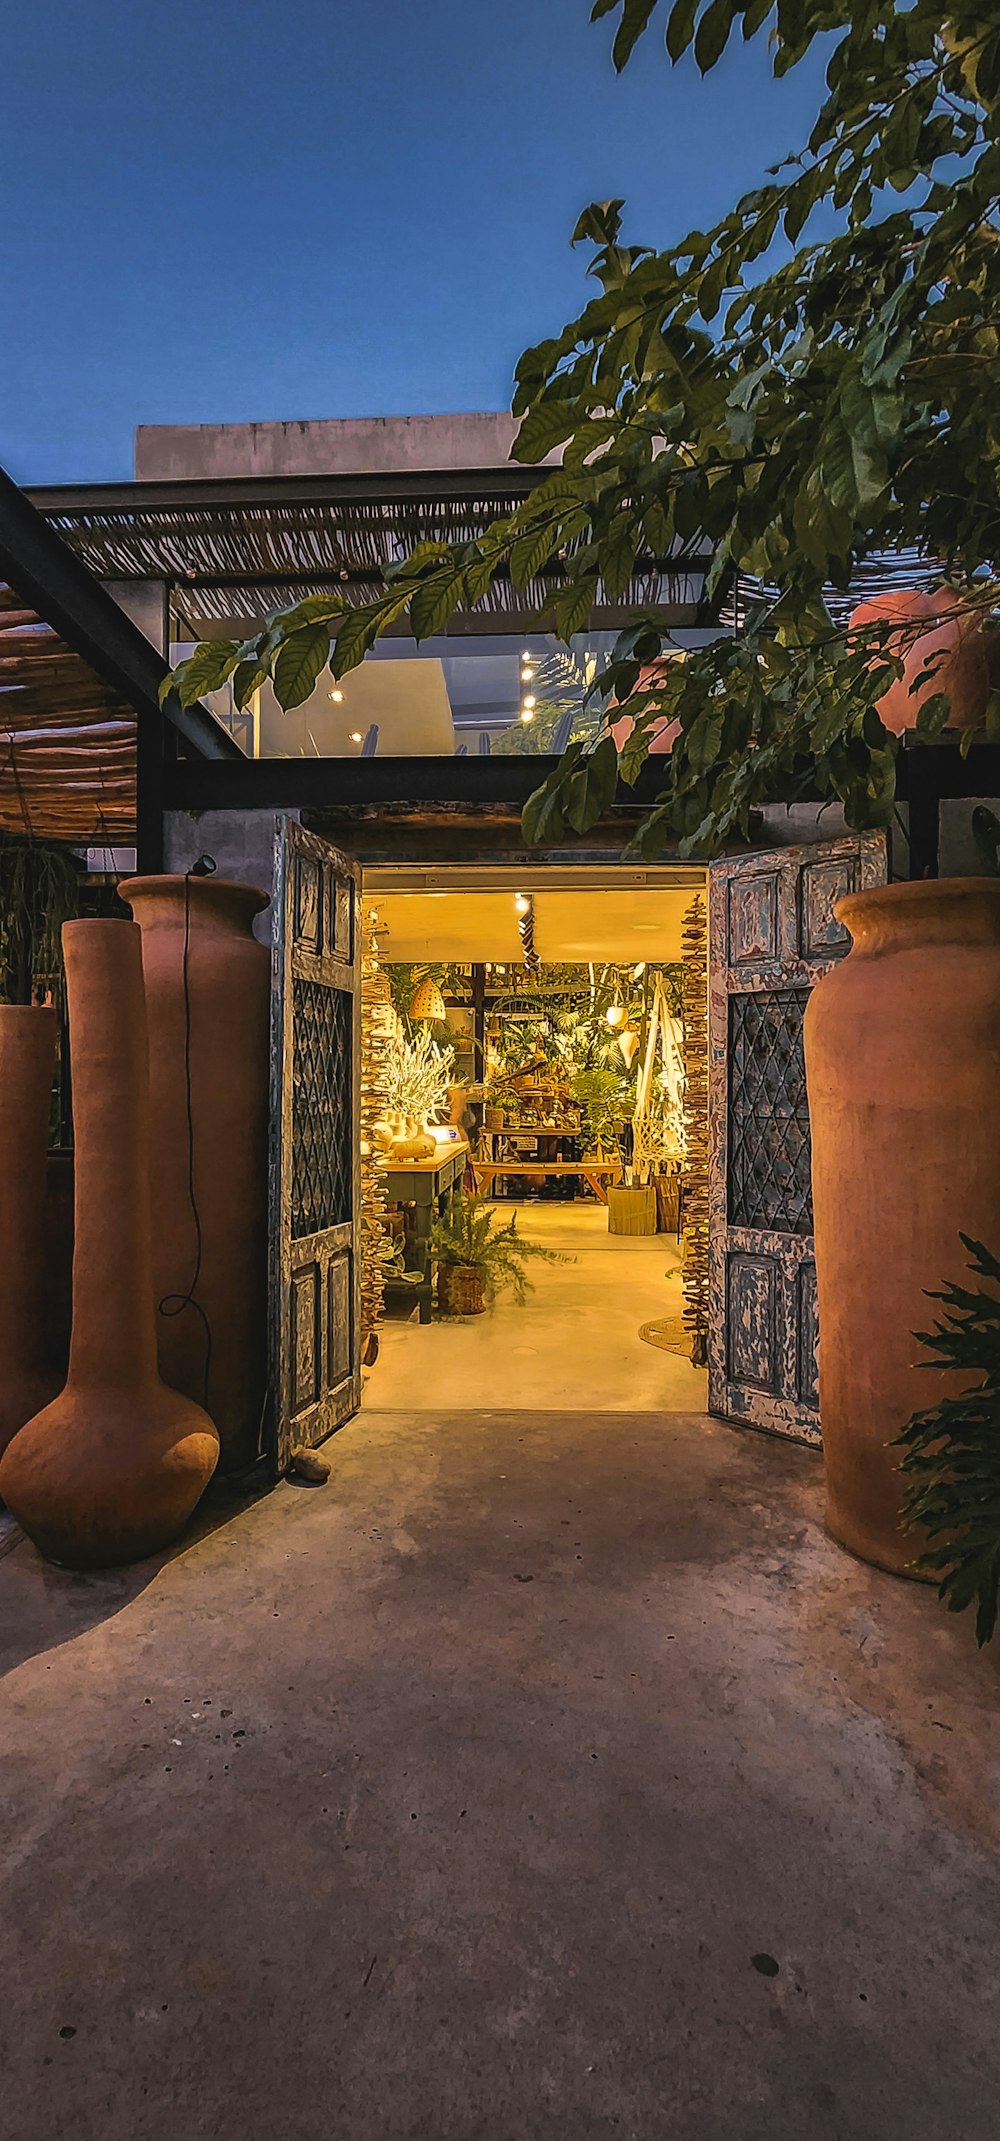 an entrance to a building with large vases